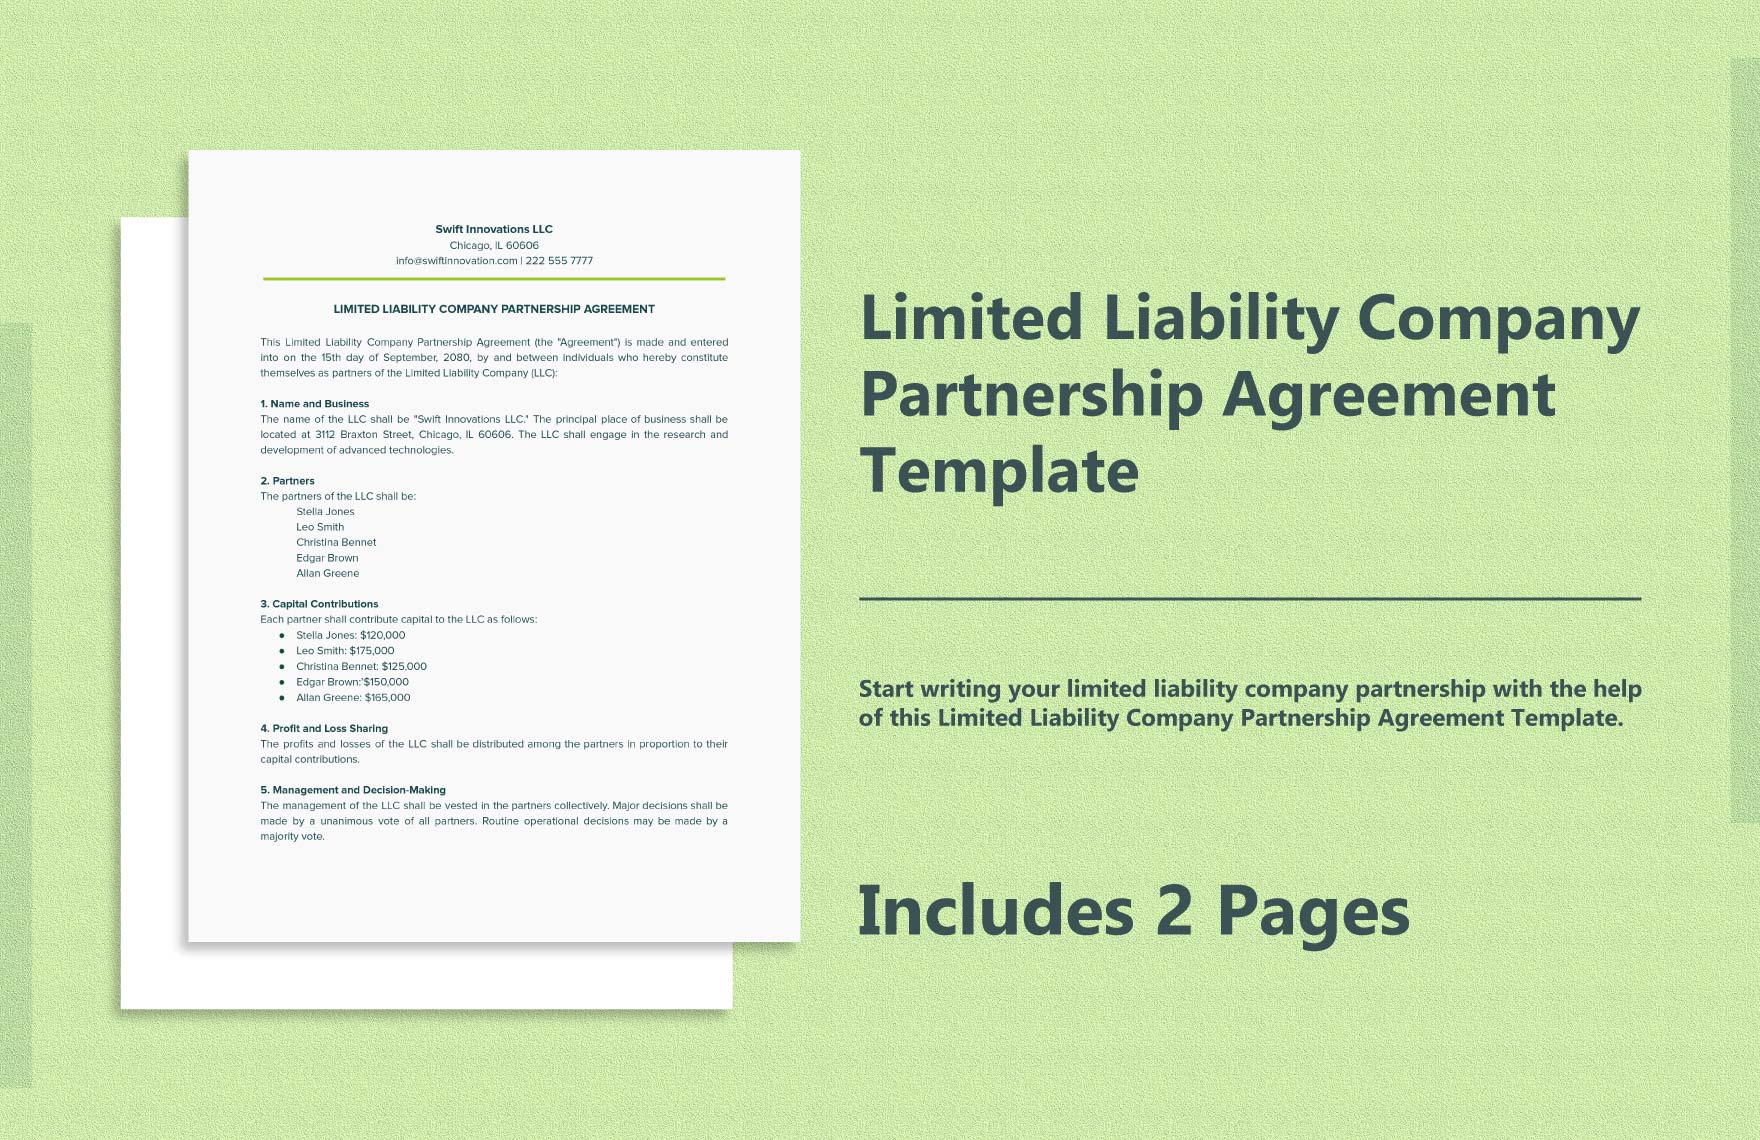 Limited Liability Company Partnership Agreement Template